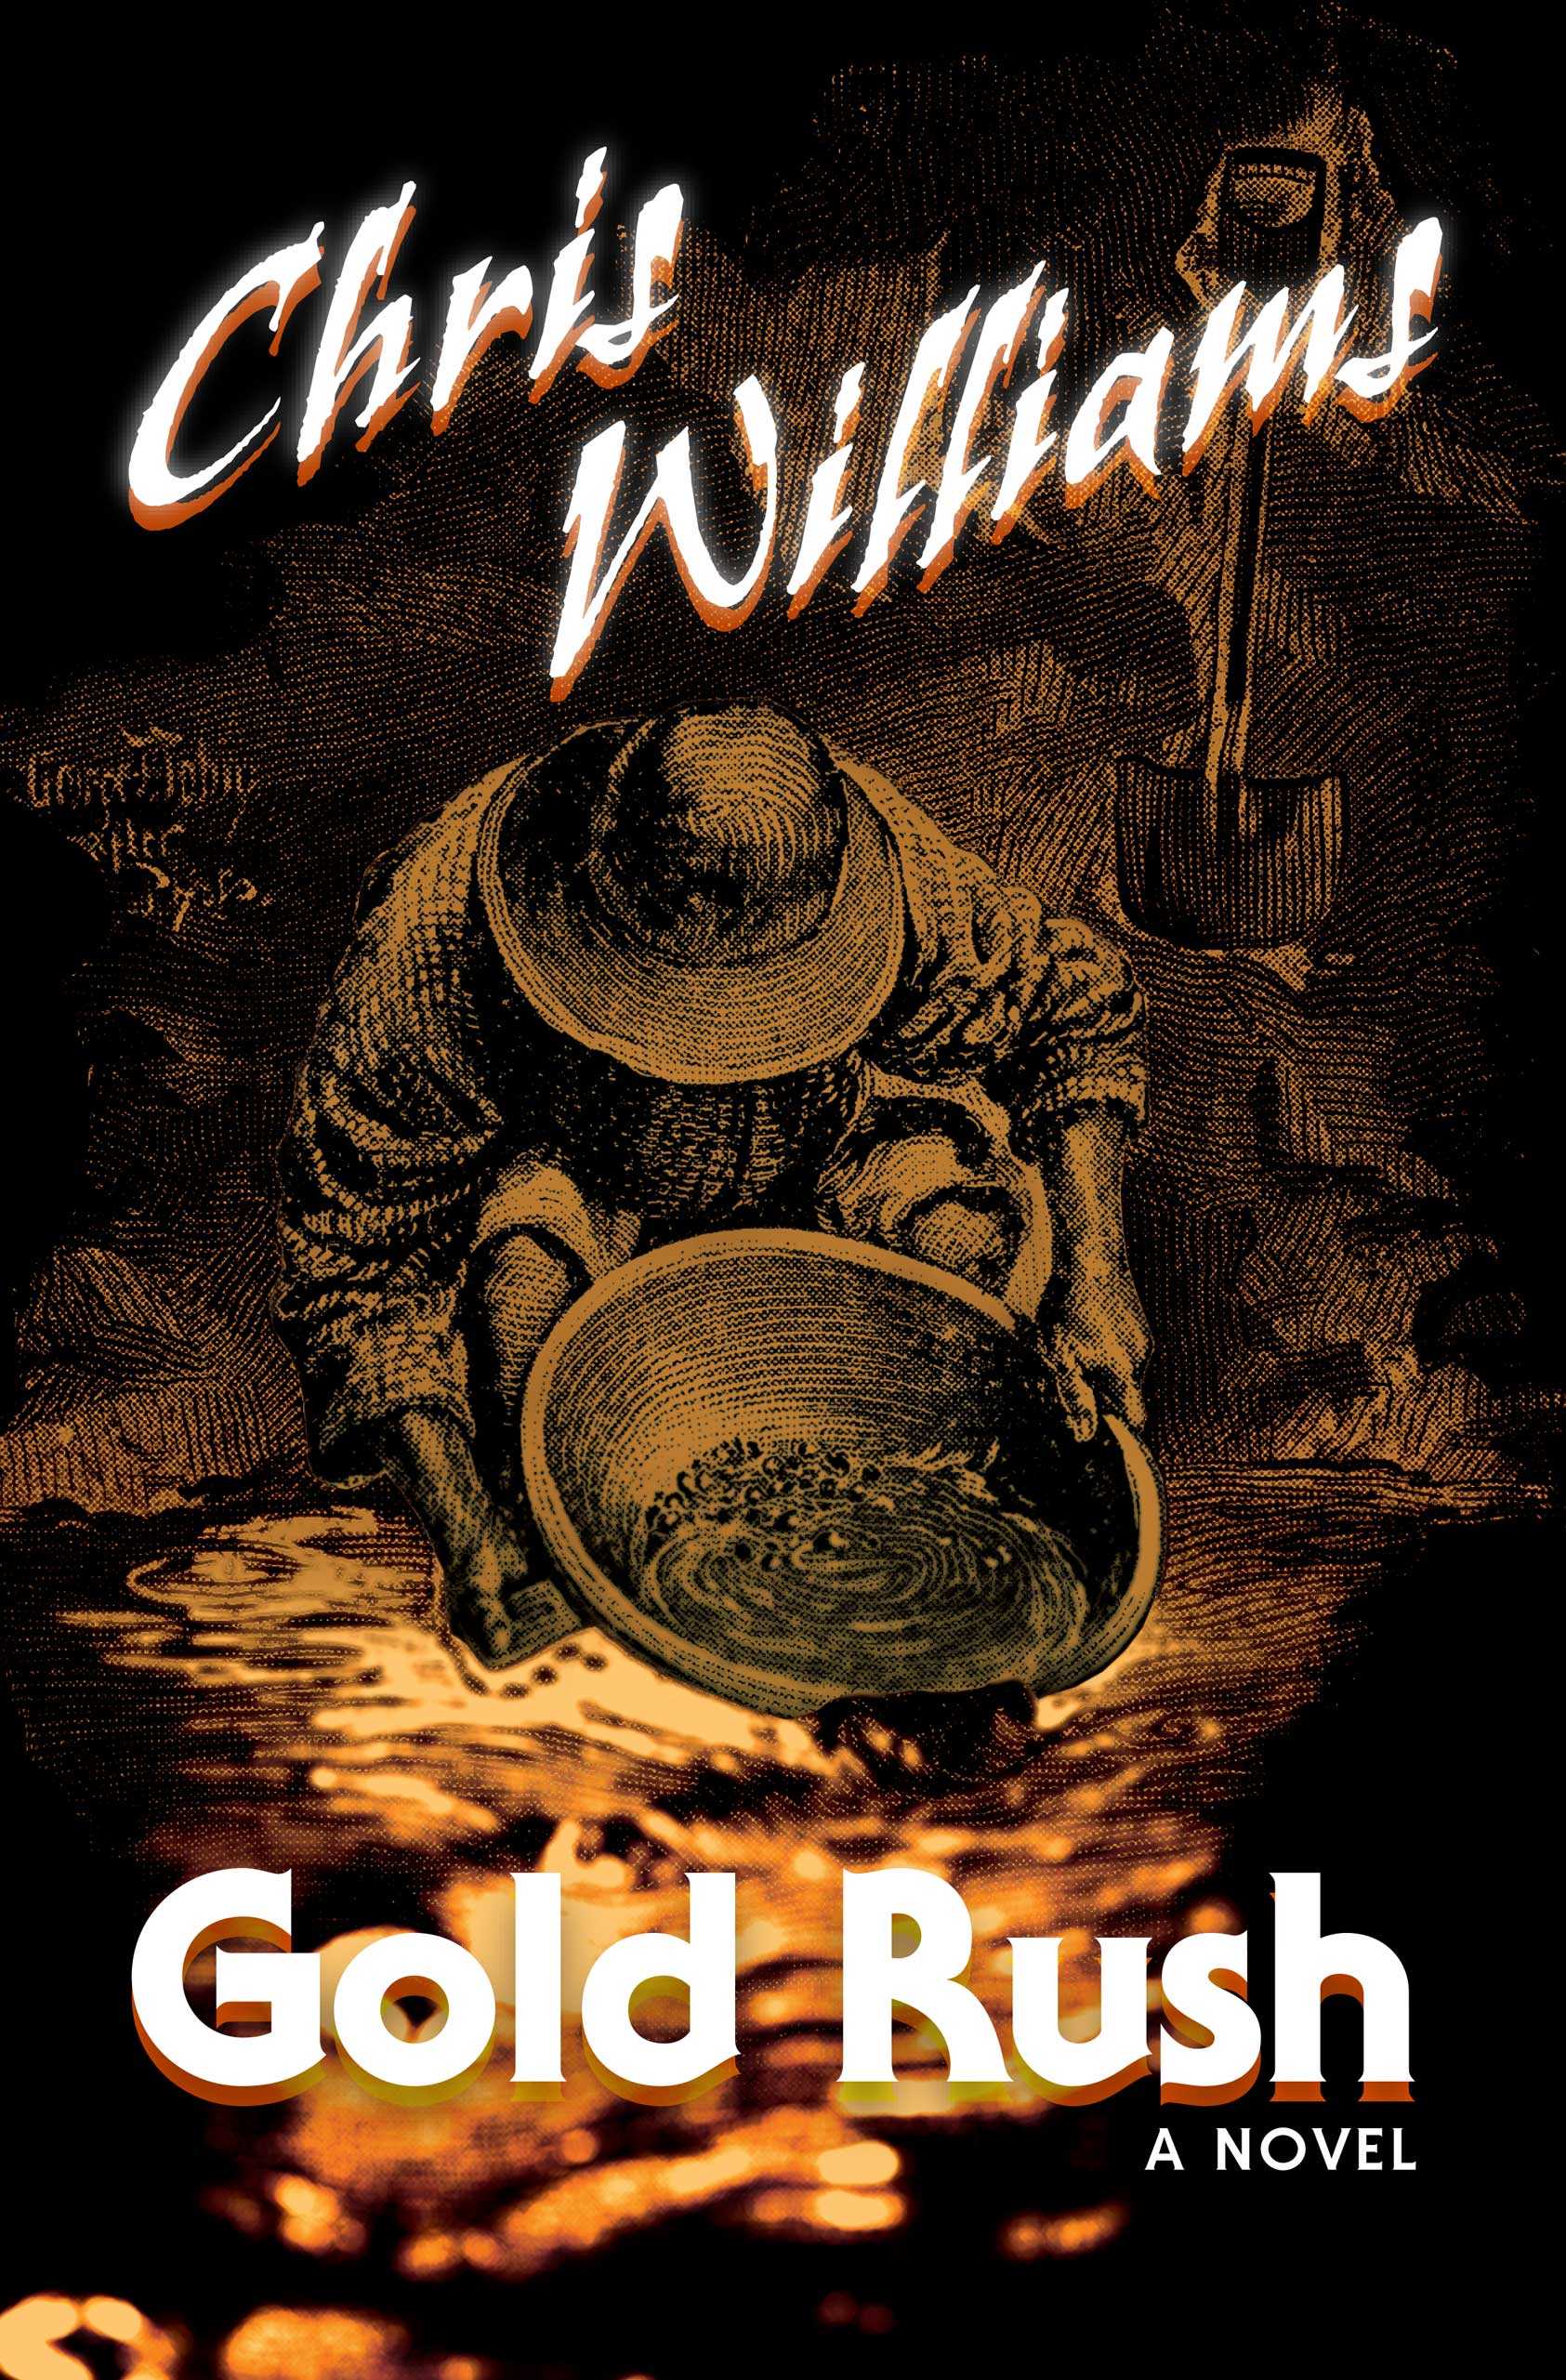 Gold Rush by Chris Williams